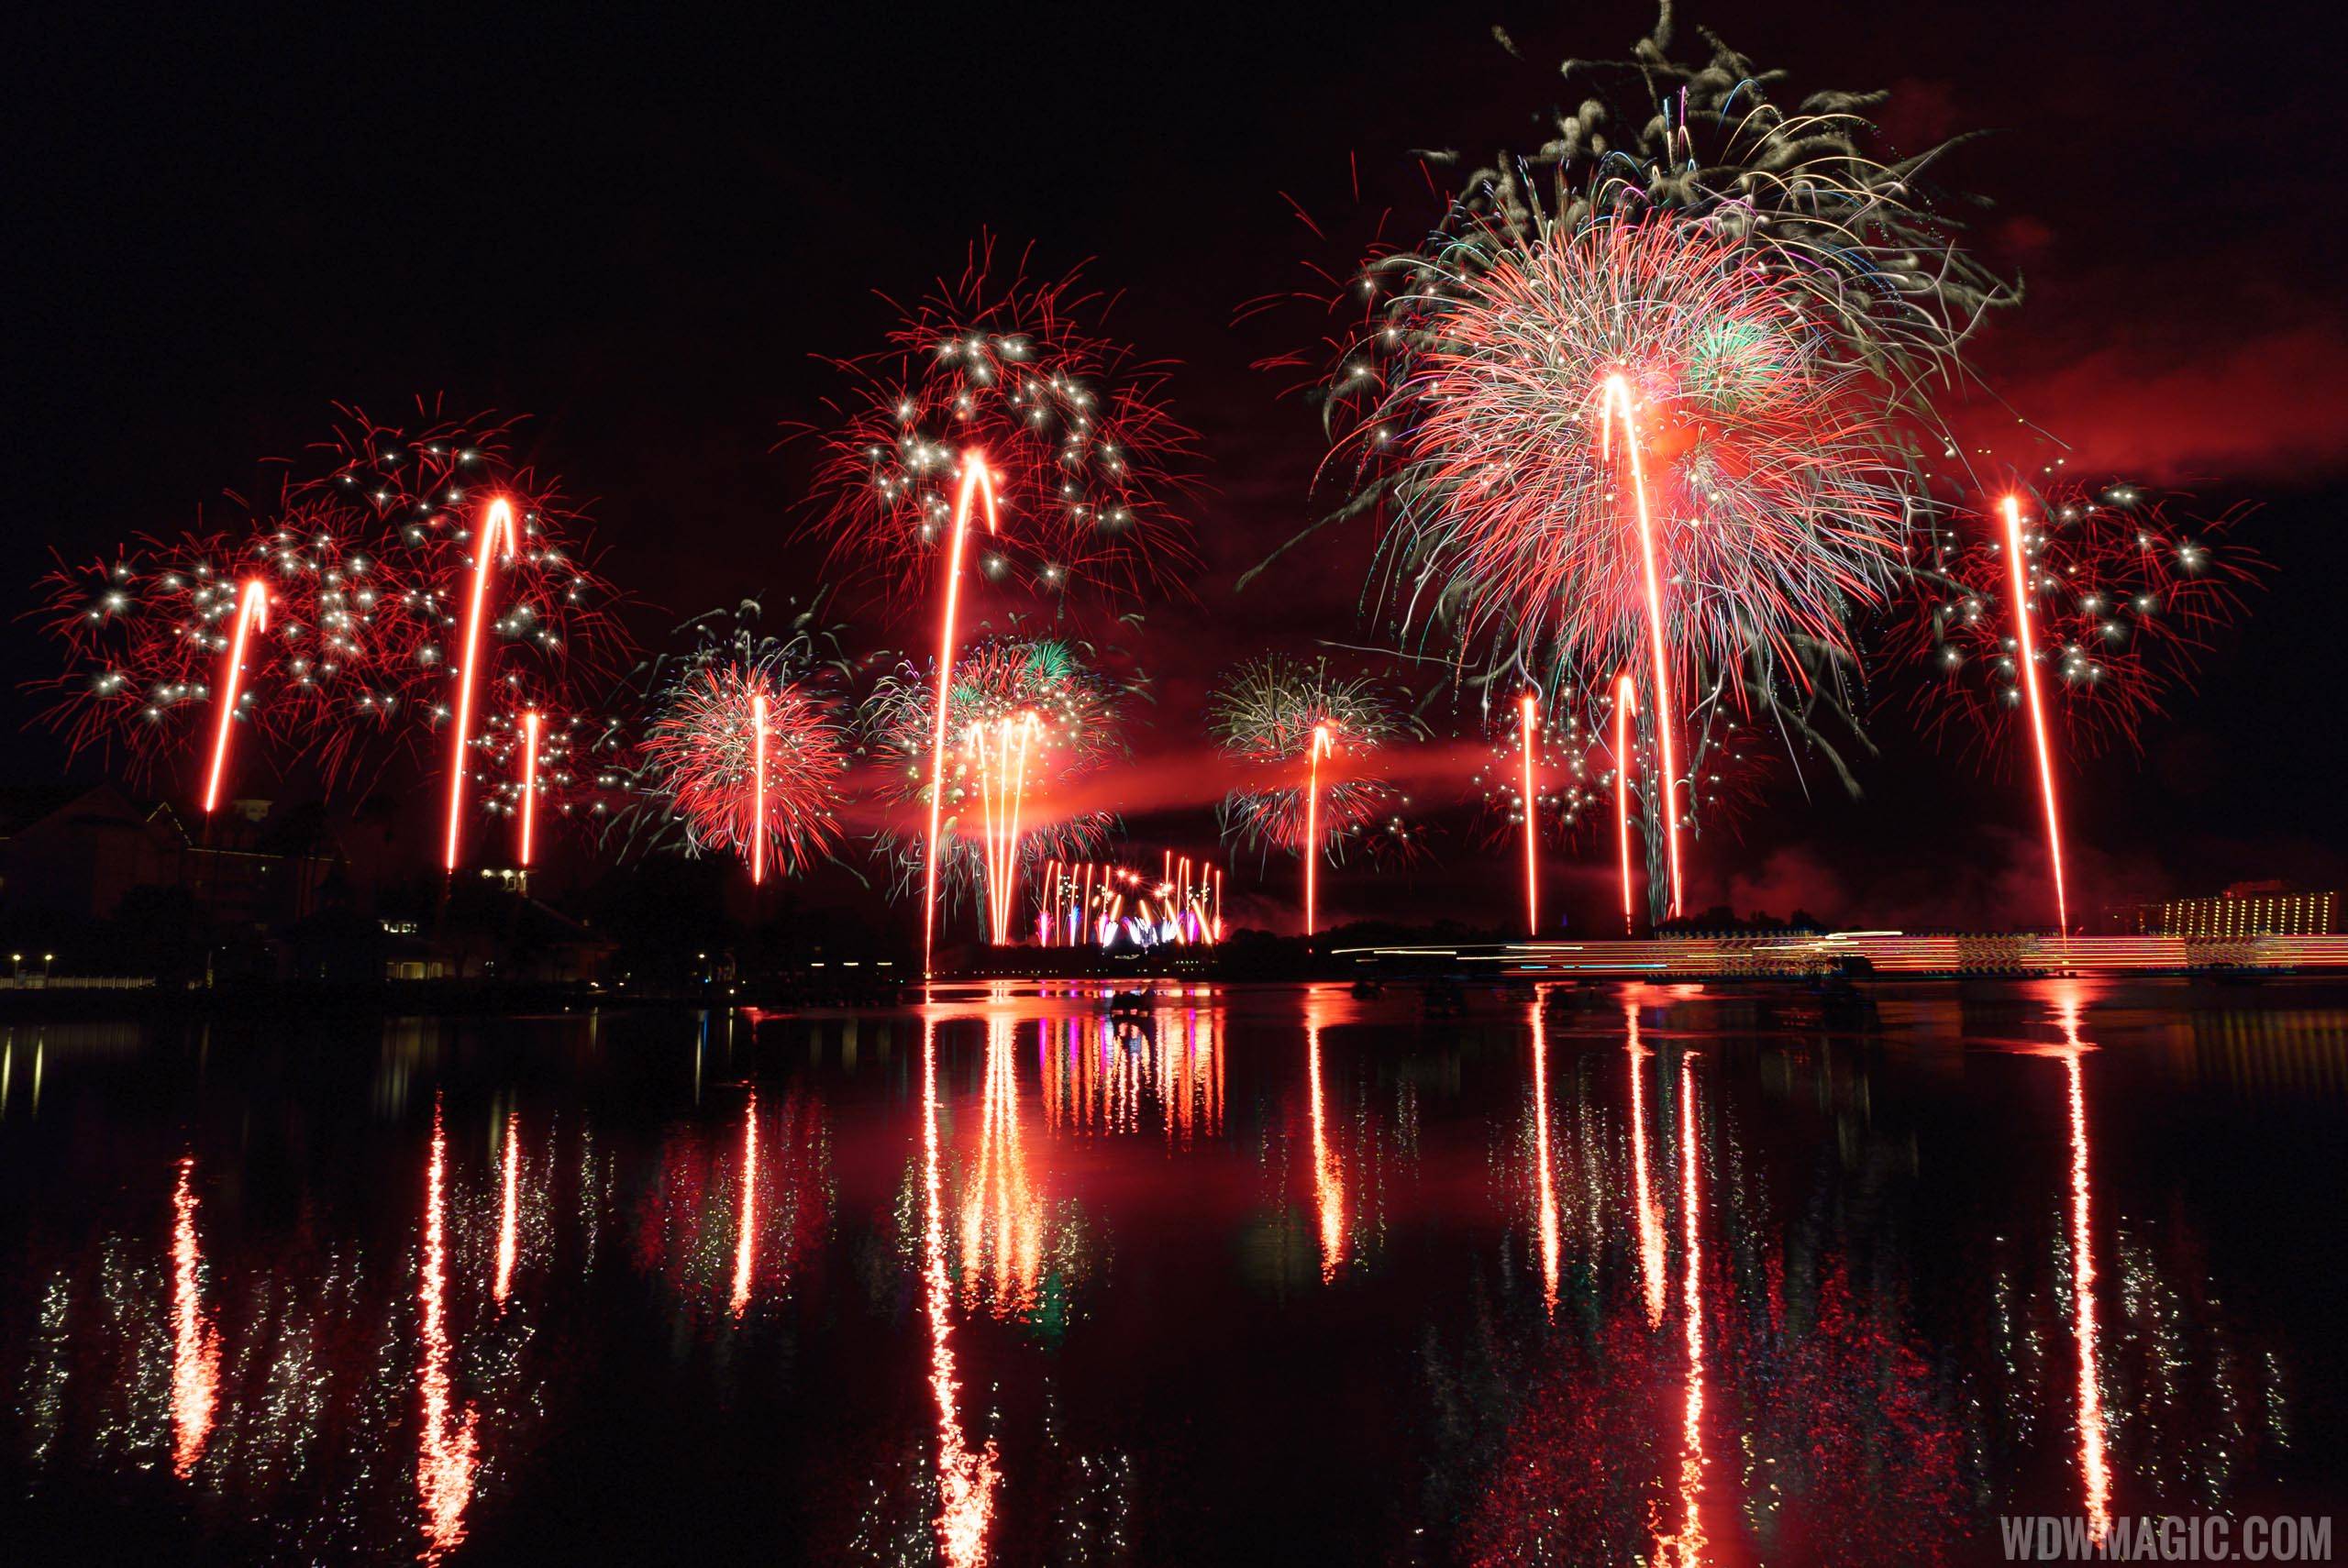 The private event will include fireworks launched from perimeter sites around the Magic Kingdom